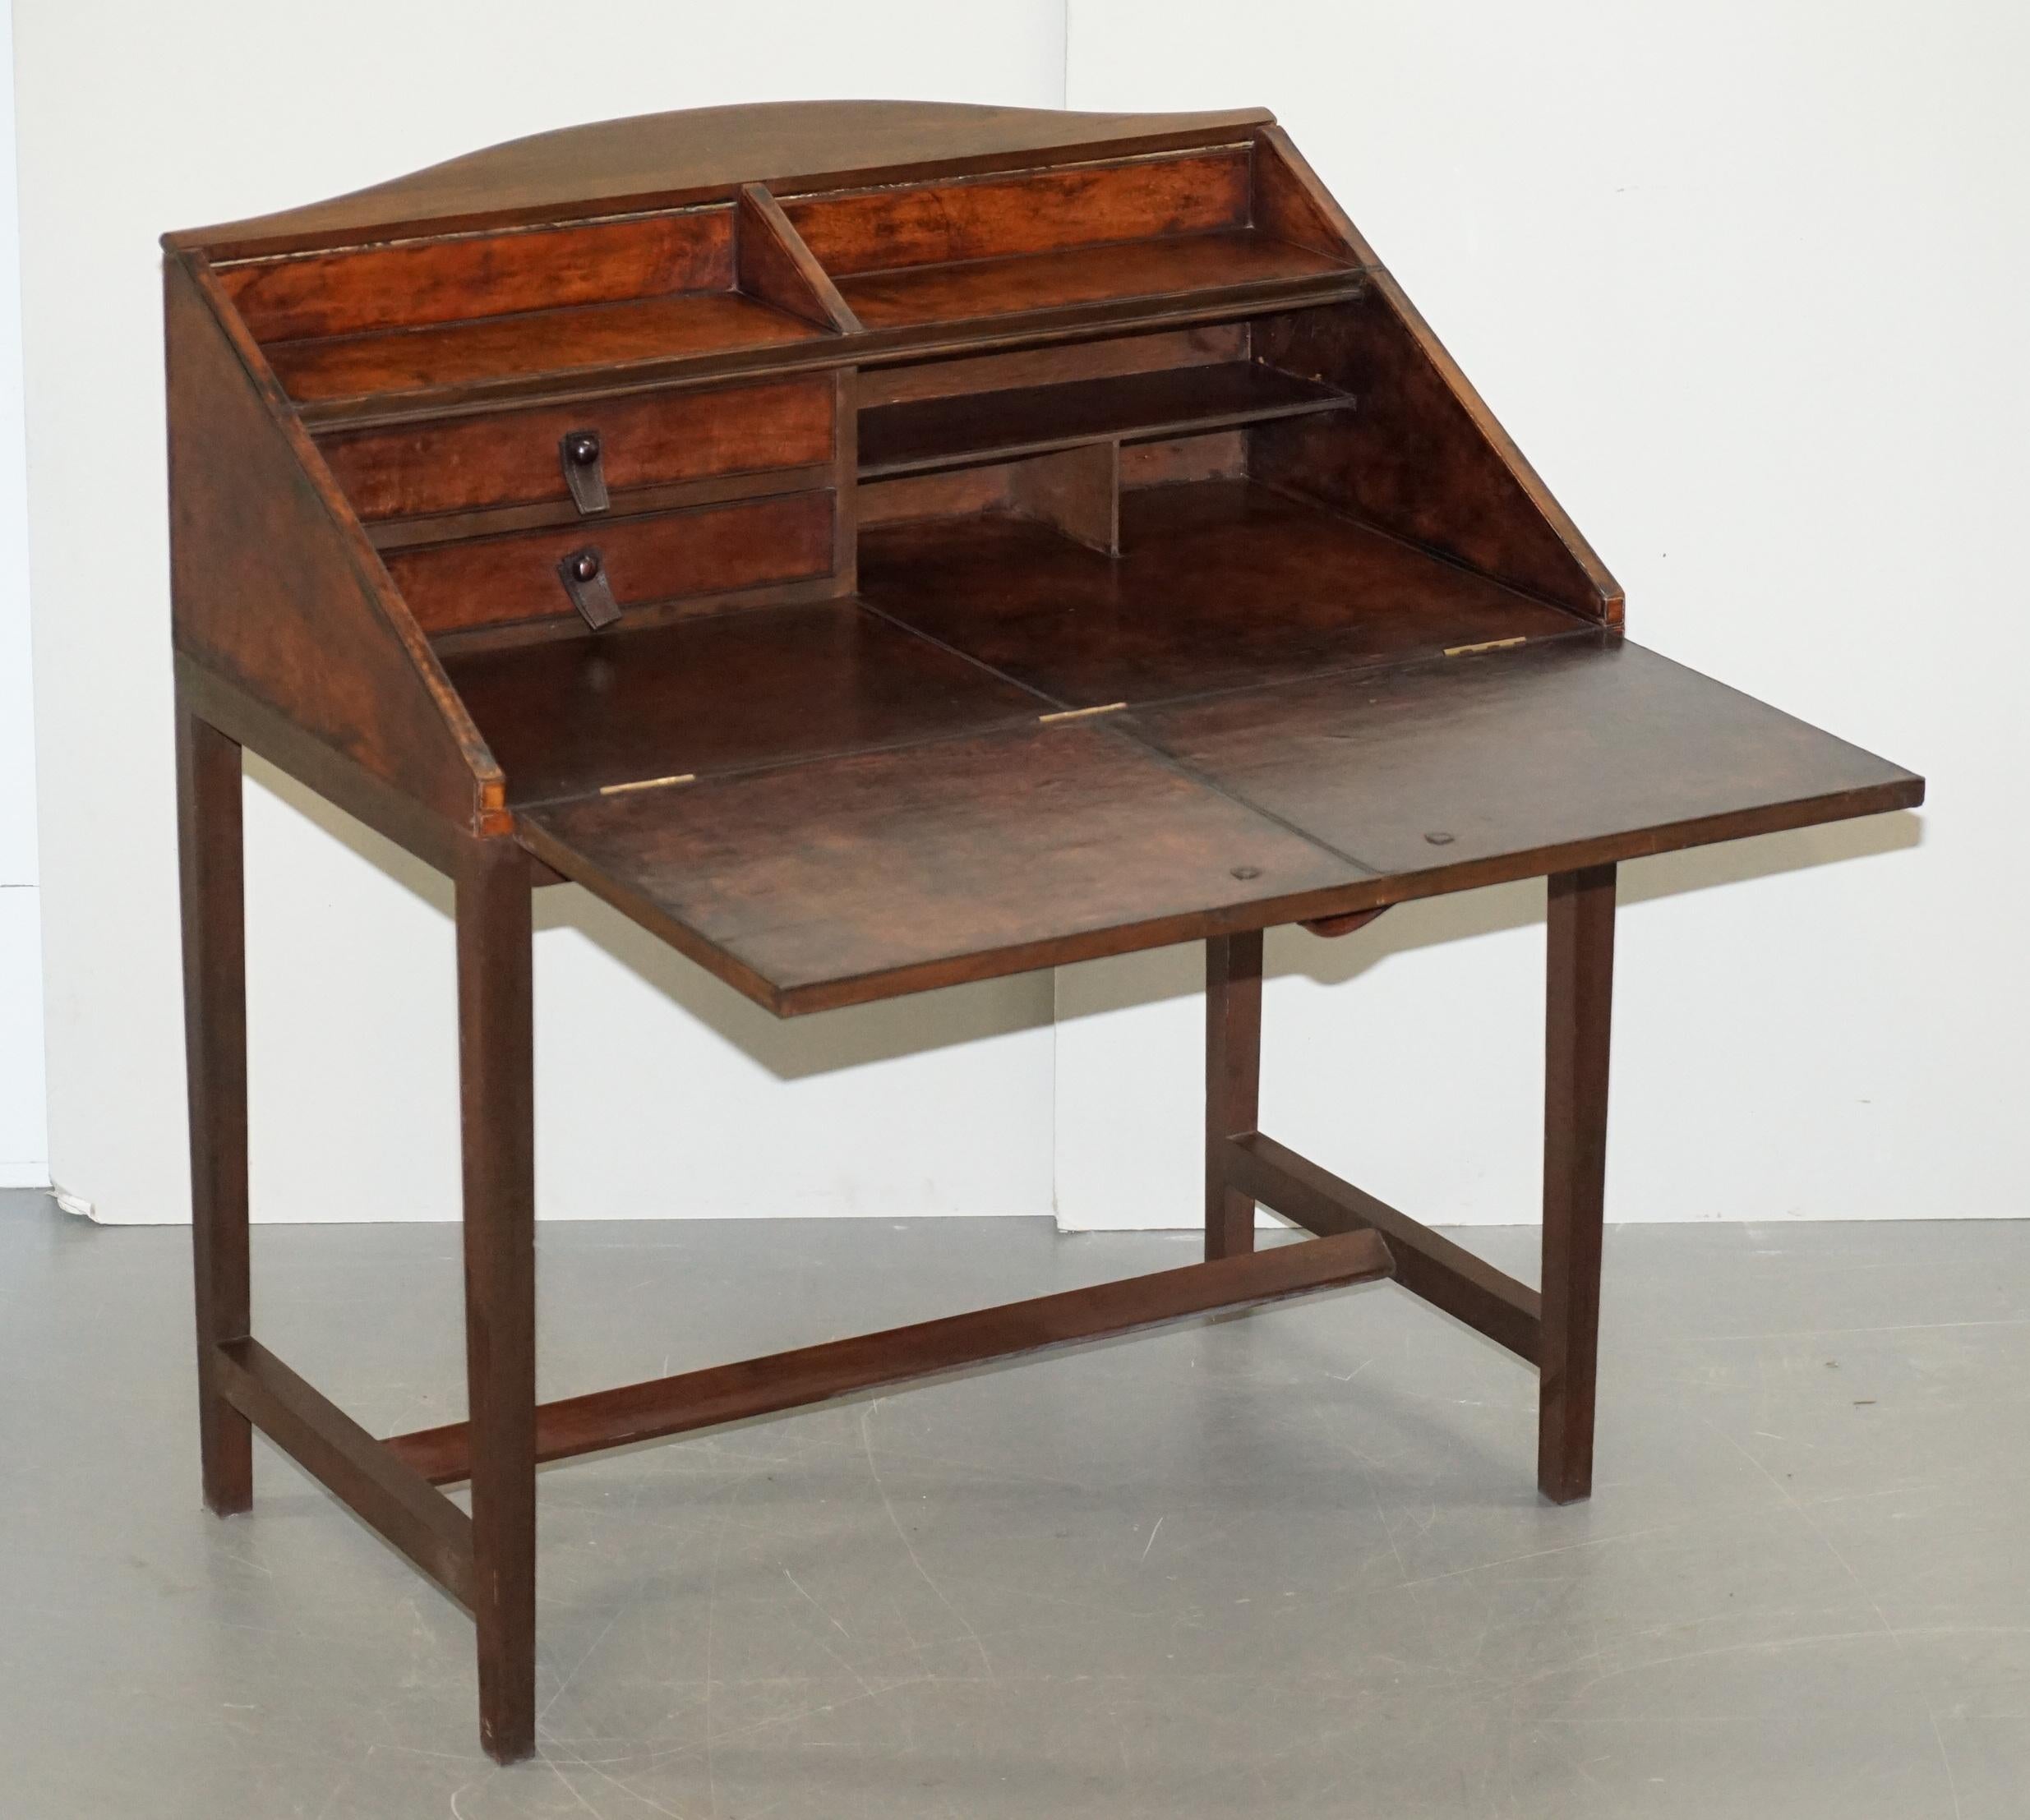 Lovely Hand Dyed Brown Leather Writing Table Desk or Bureau with Twin Drawers 4